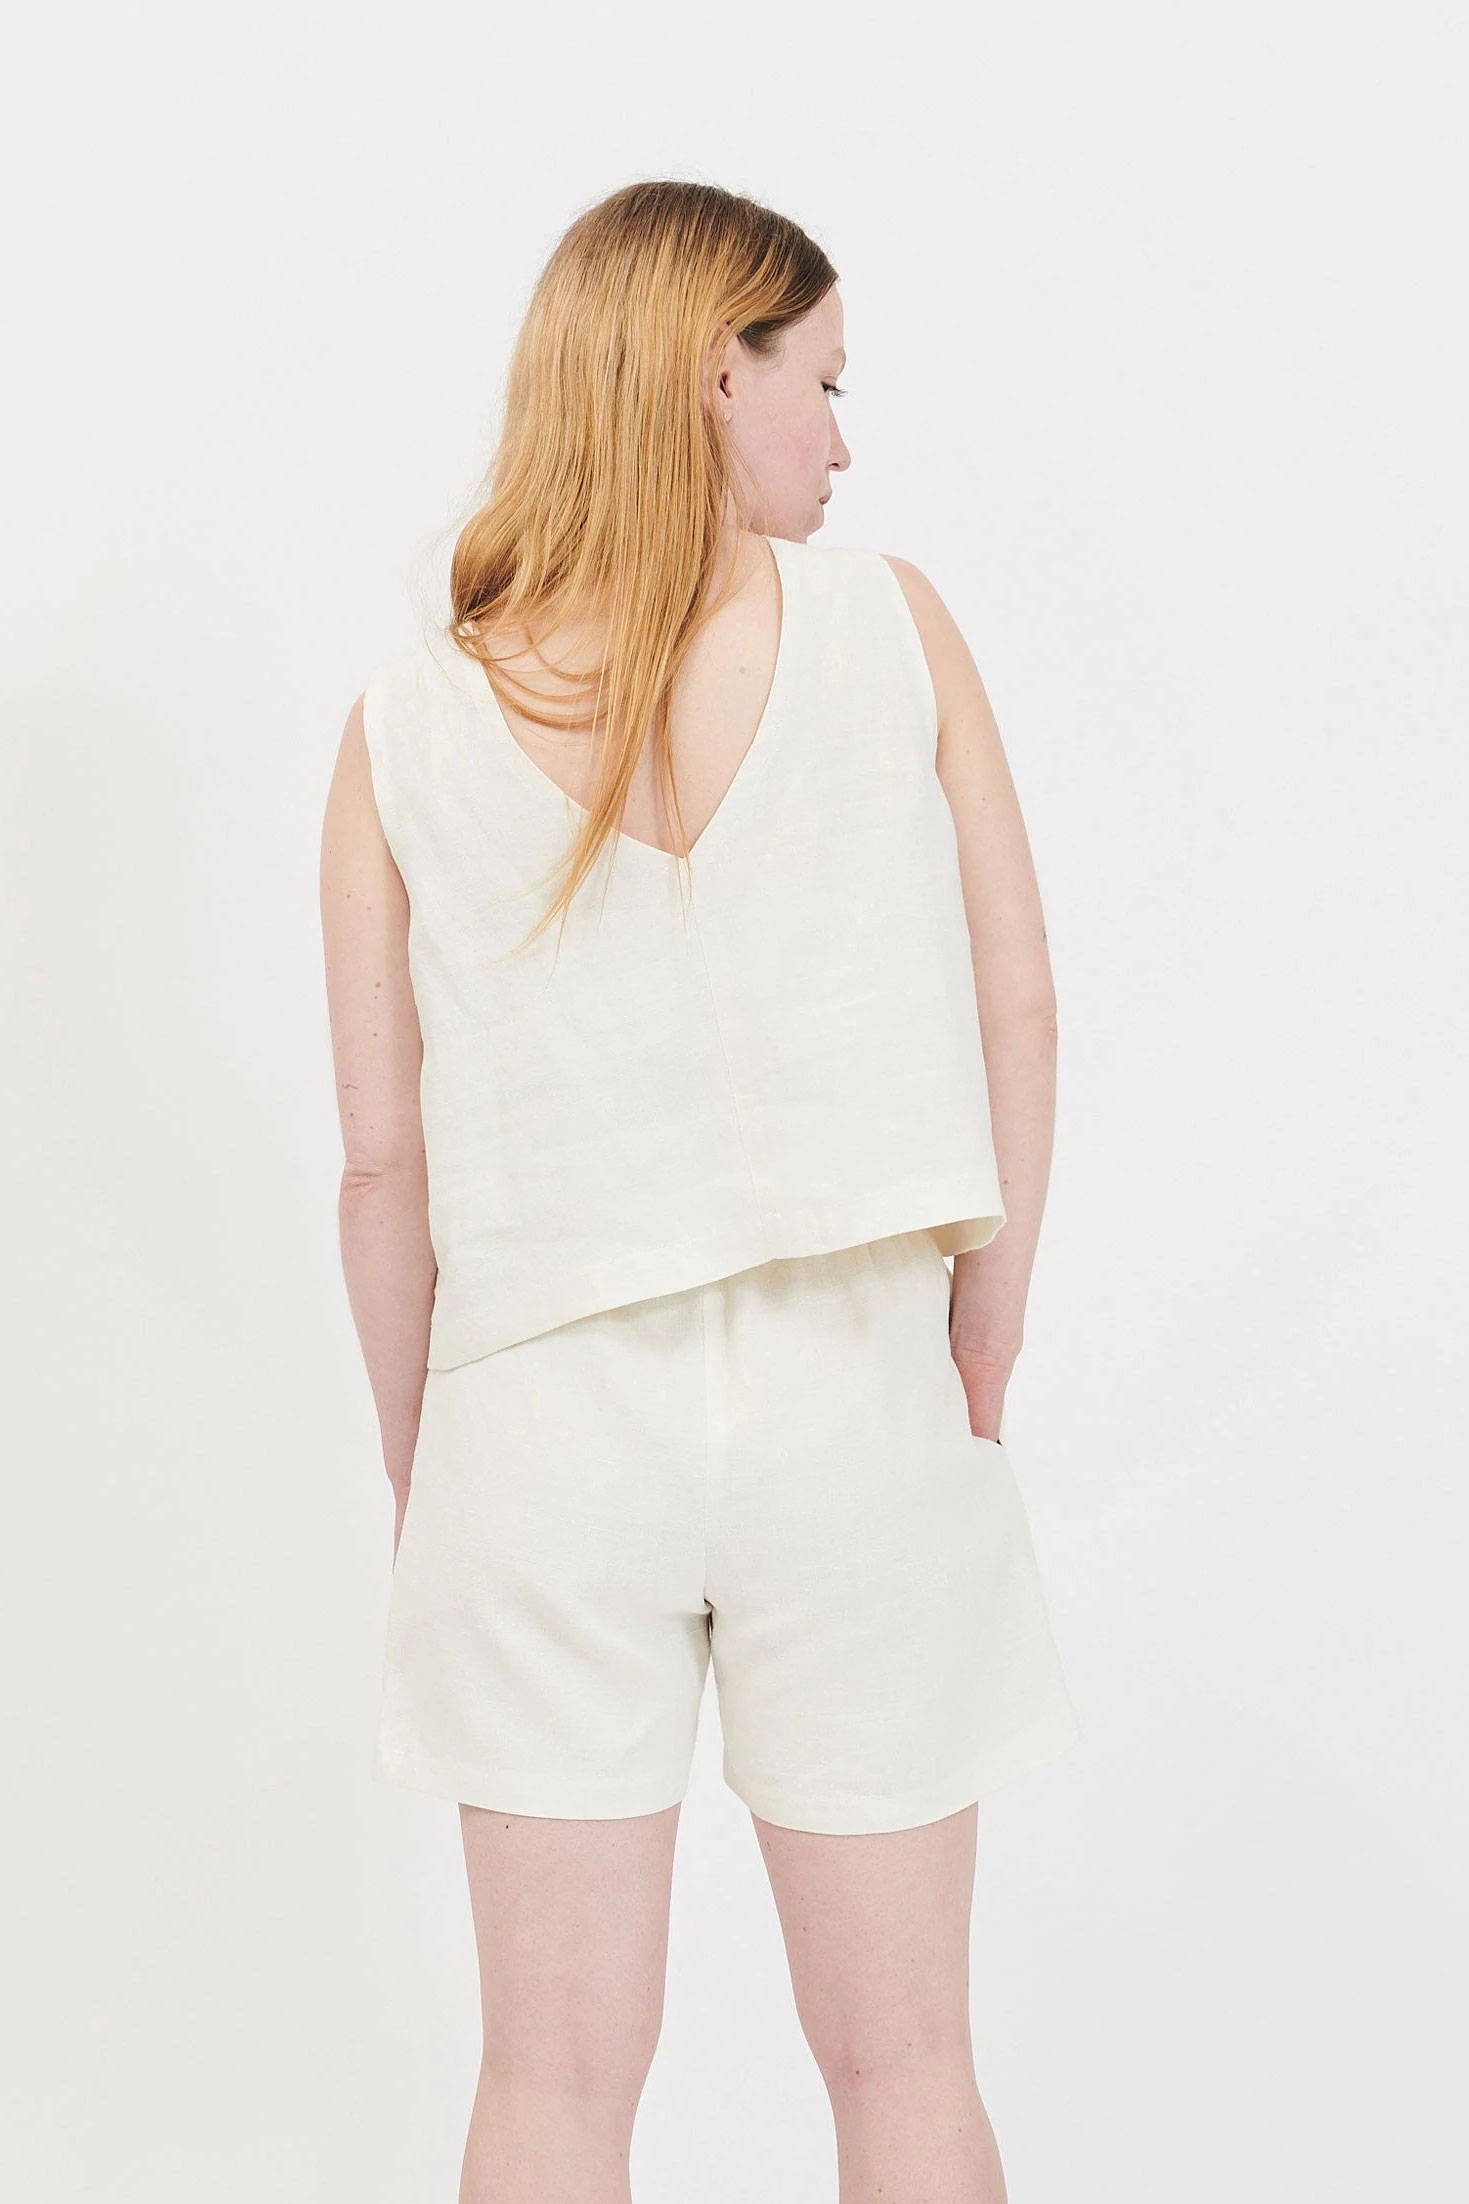 SHIO produces handmade and versatile tops and bottoms made in organic cotton and OEKO-TEX certified linen 